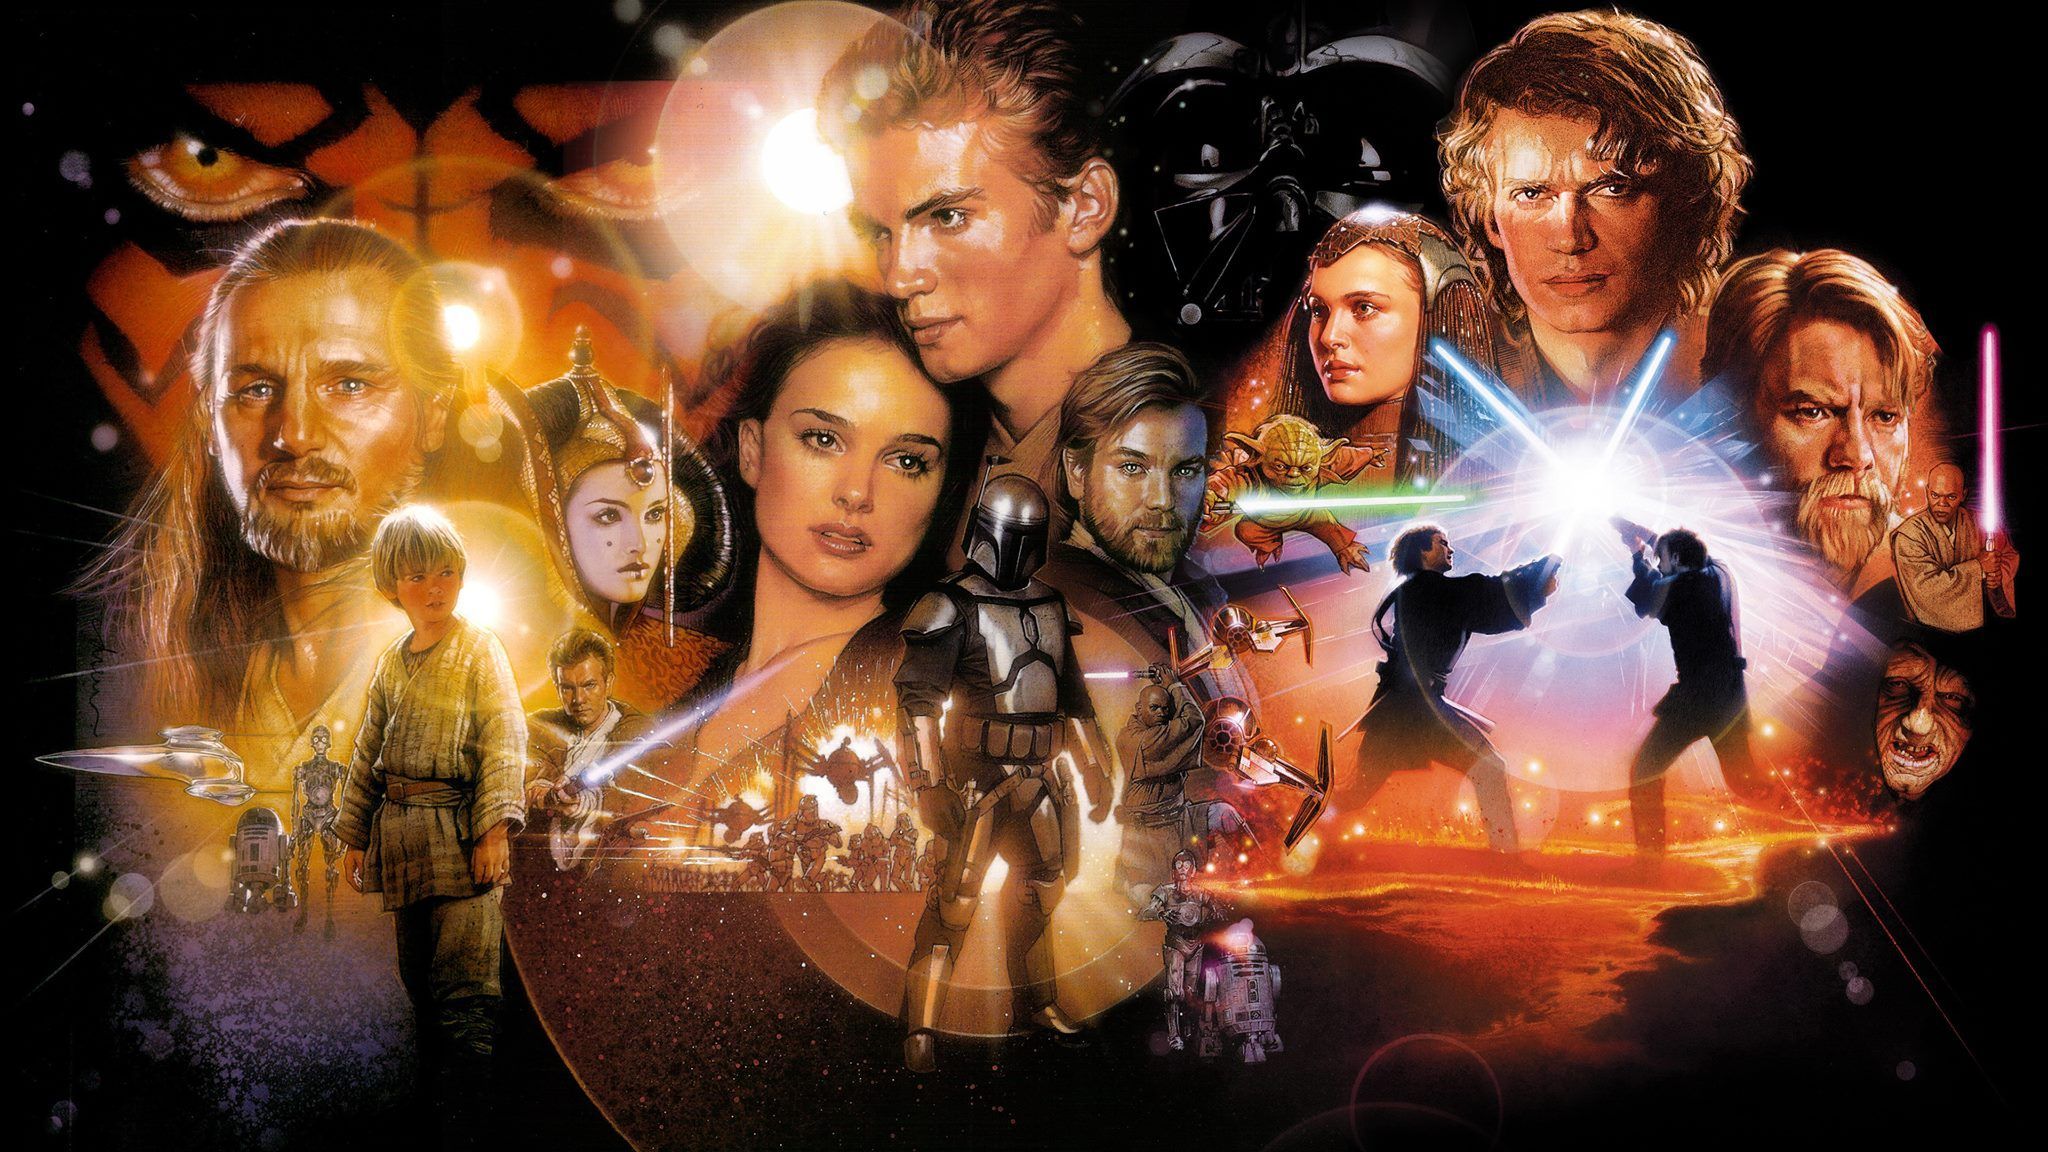 Star Wars Prequel Trilogy Characters Wallpapers - Wallpaper Cave Star Wars Star Background